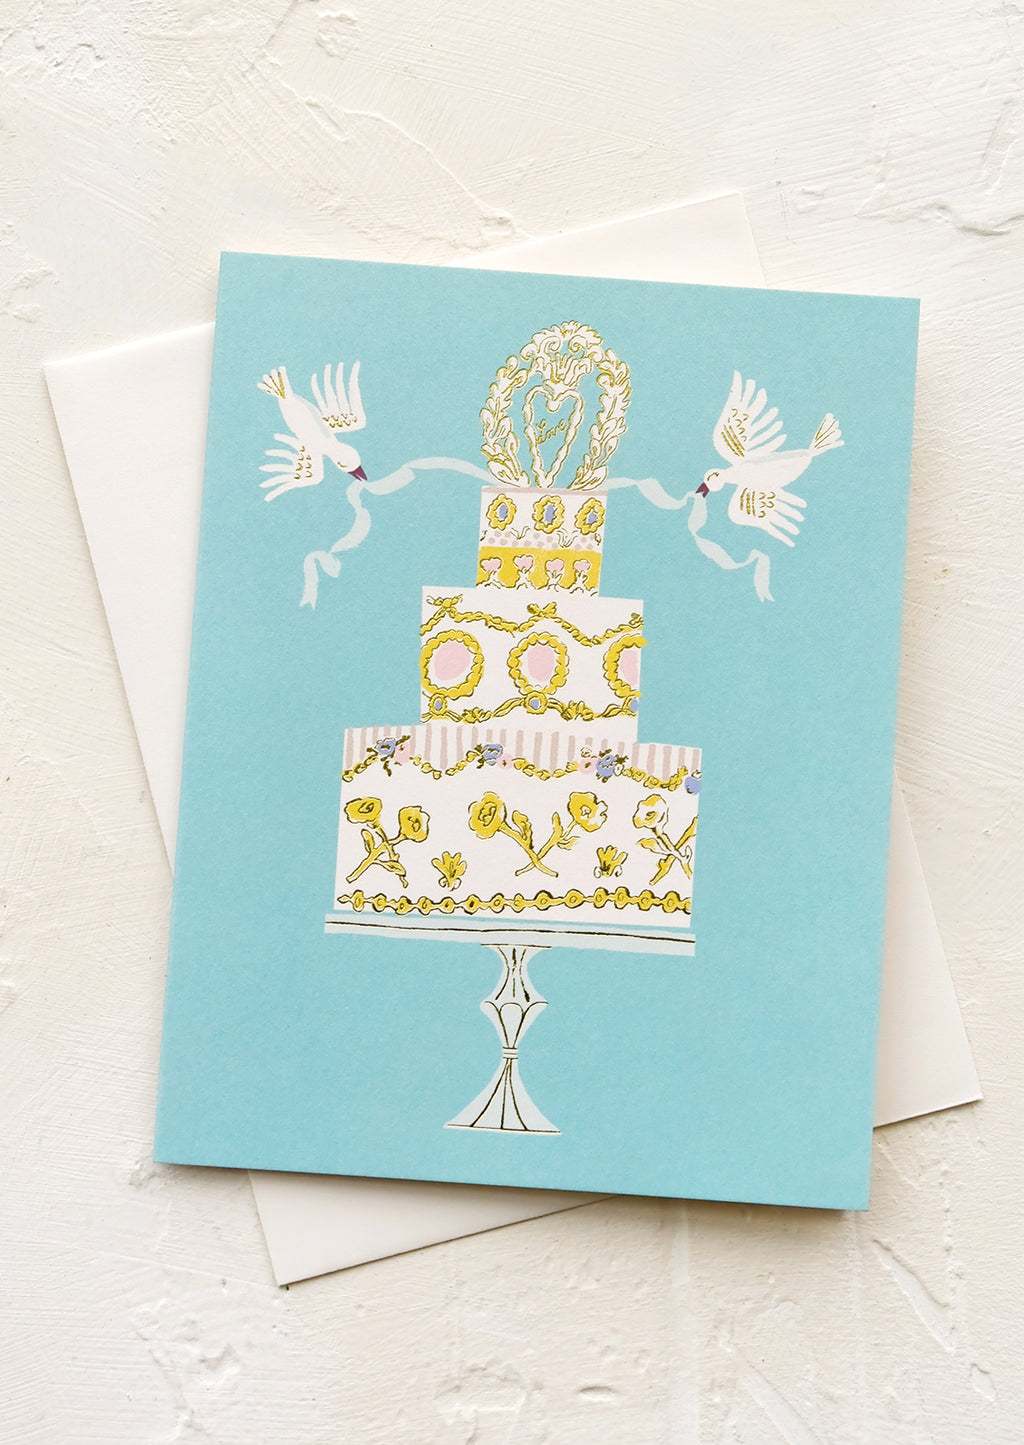 1: A greeting card with illustration of wedding cake with doves.